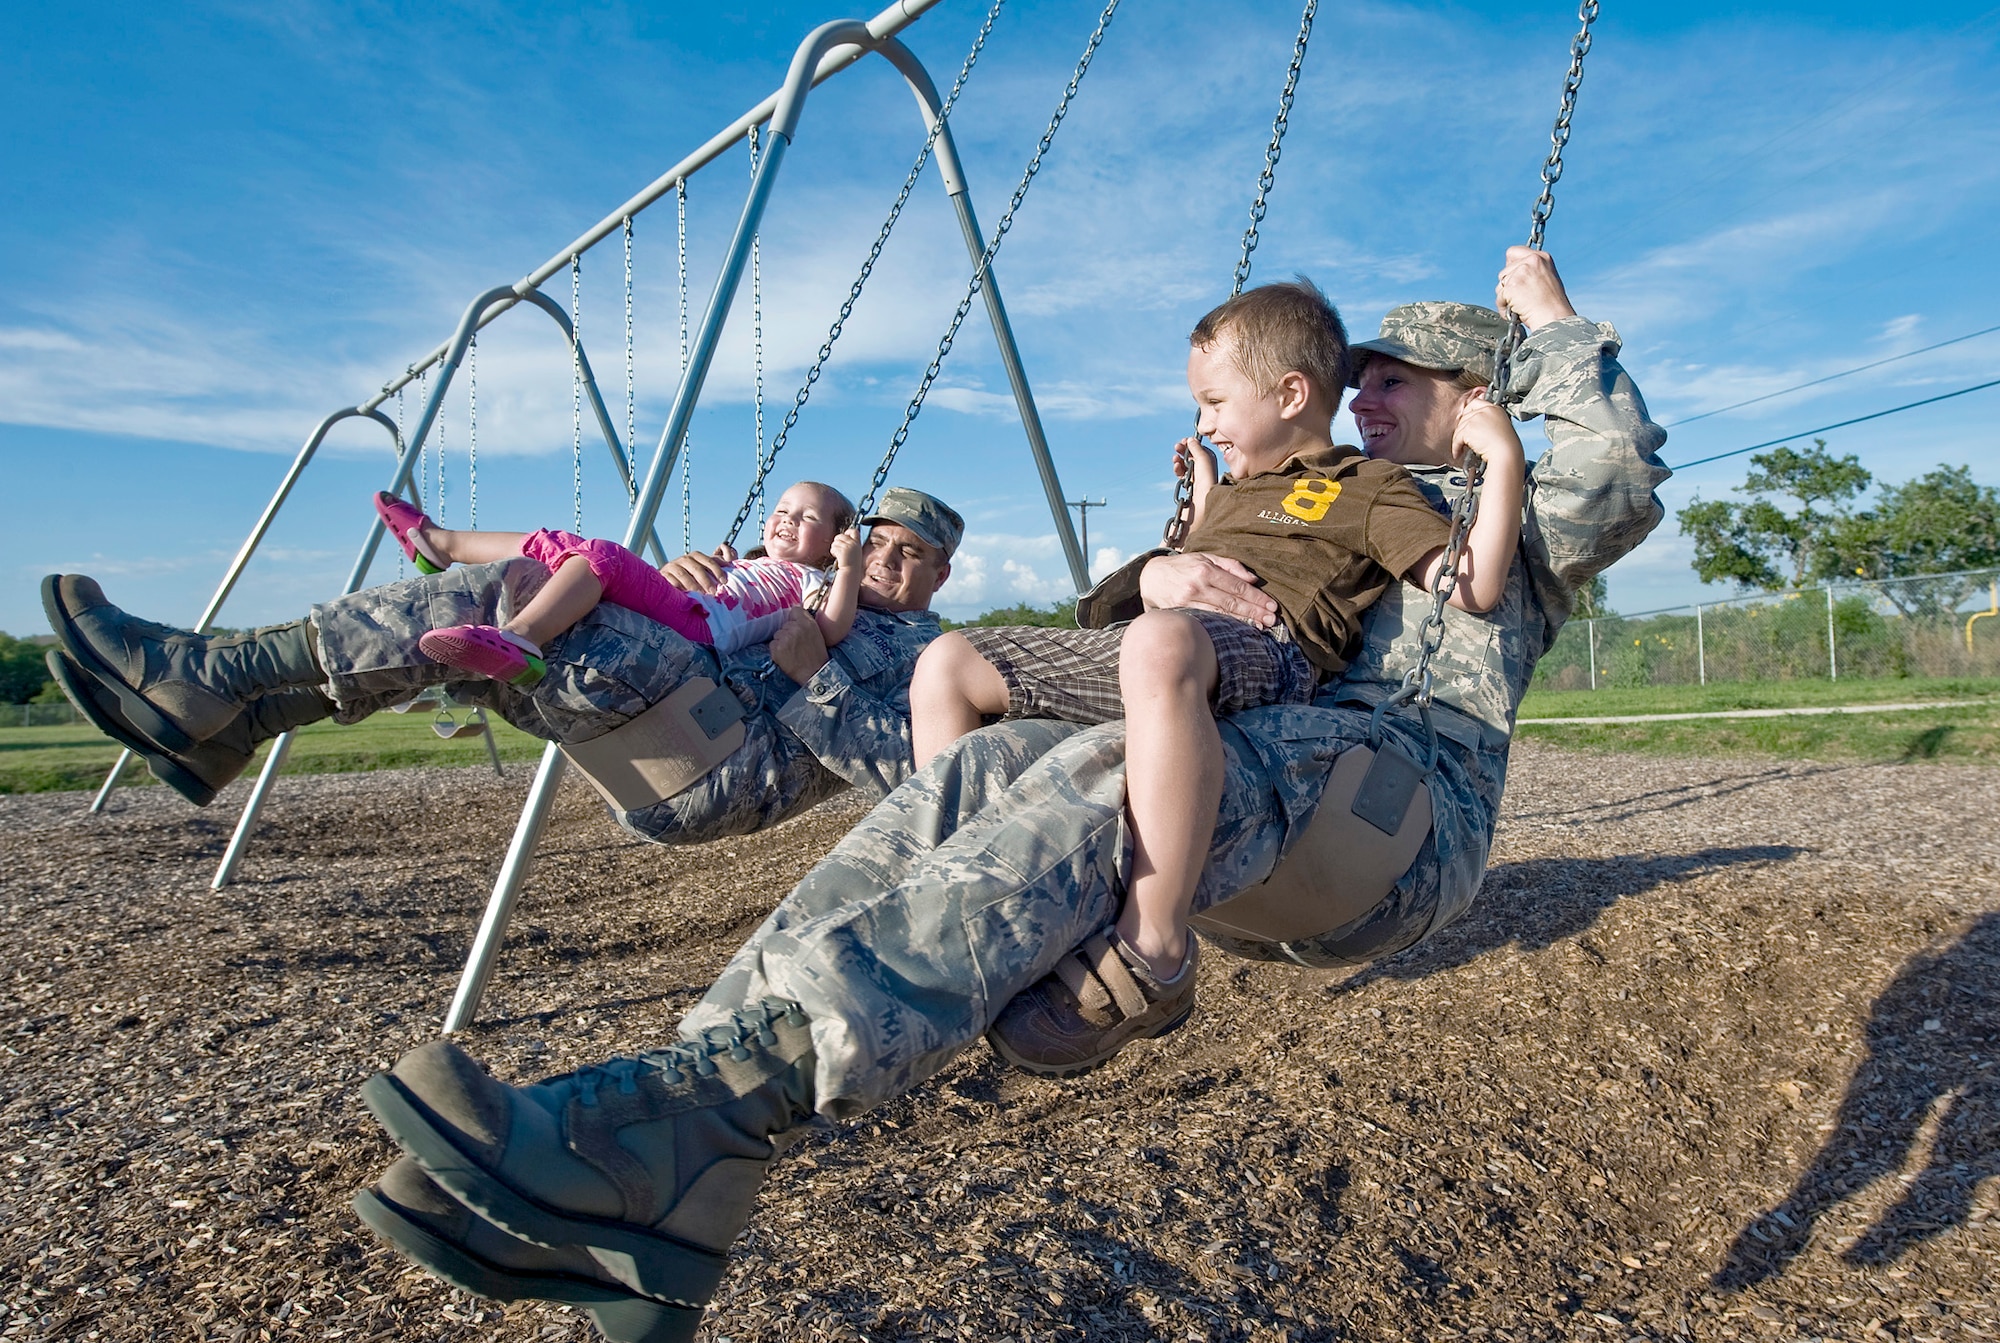 Master Sgt. Roldolfo Gamez and his wife, Tech. Sgt. Christina Gamez, swing with their children at their neighborhood park after work. (U.S. Air Force photo/Staff Sgt. Bennie J. Davis III)